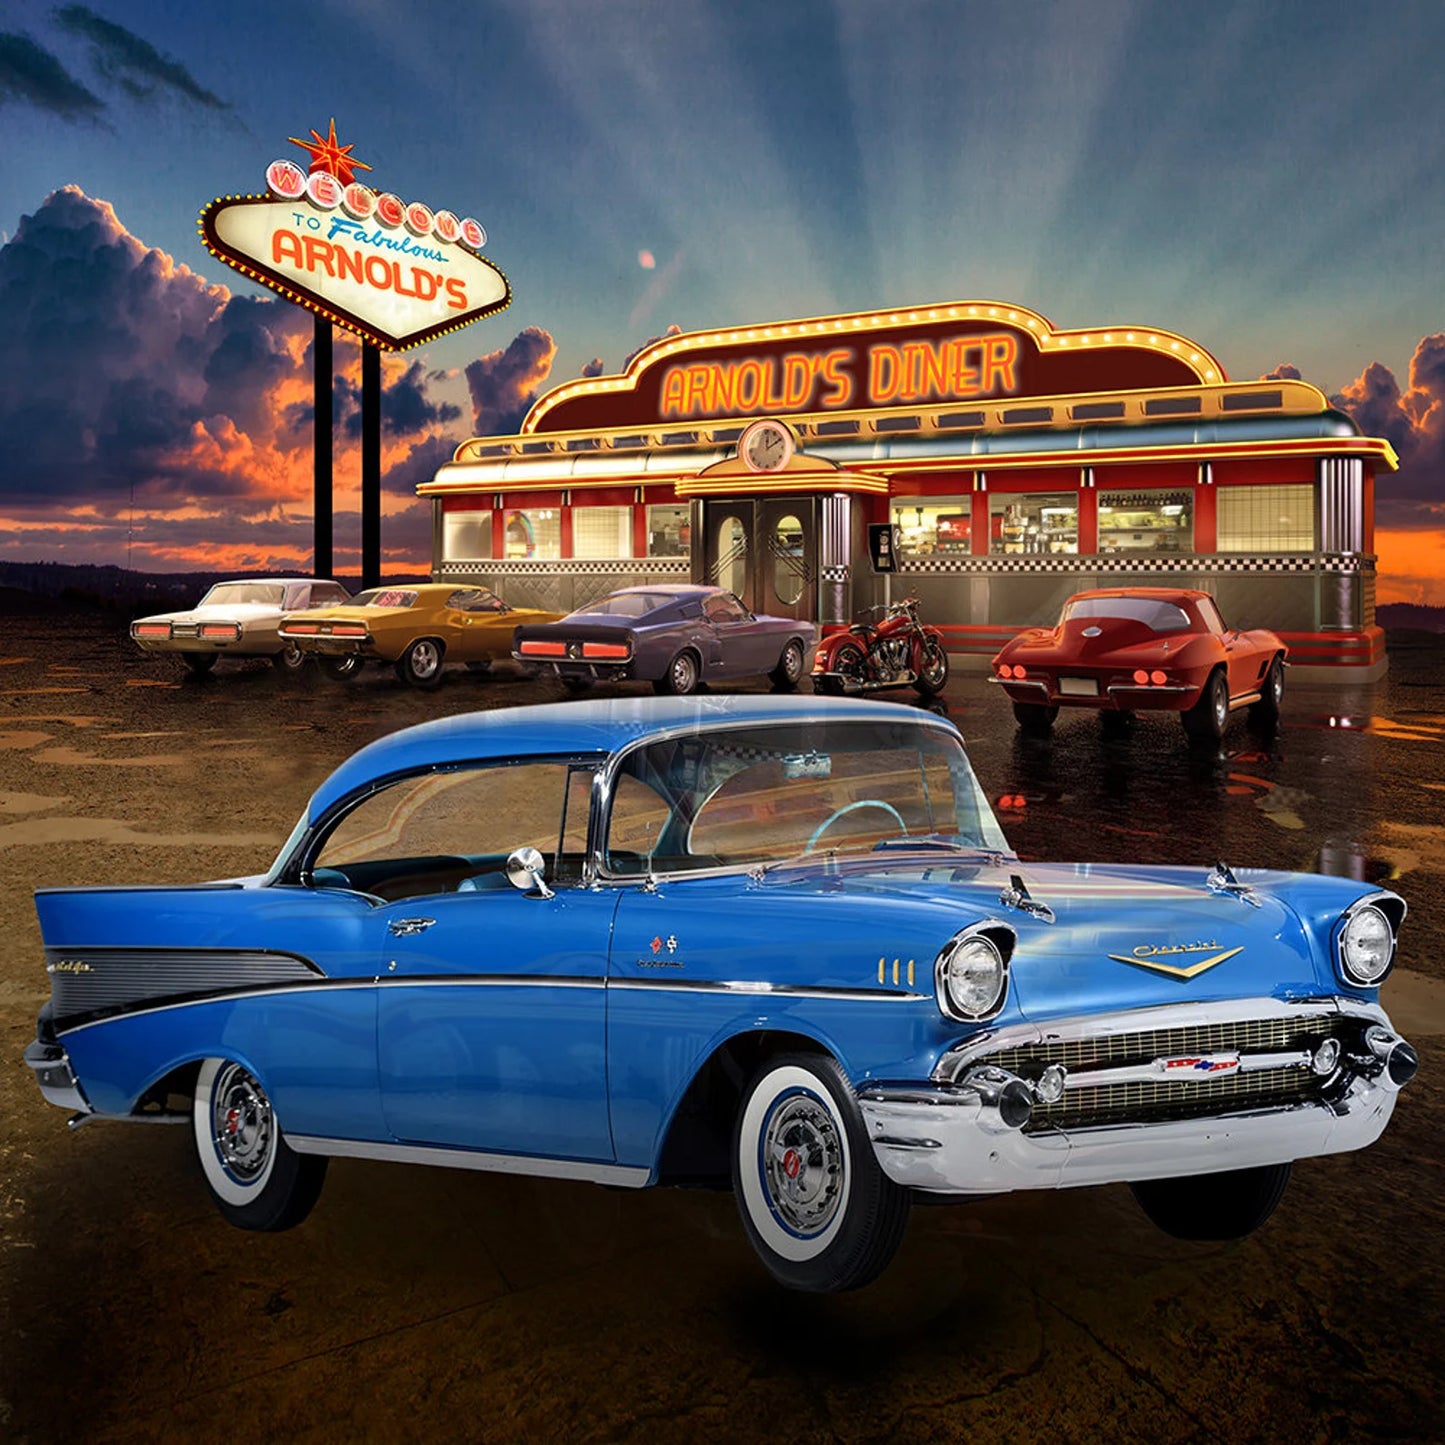 Blue 57 Chevy Diner Photo Backdrop - Basic 10  x 8  